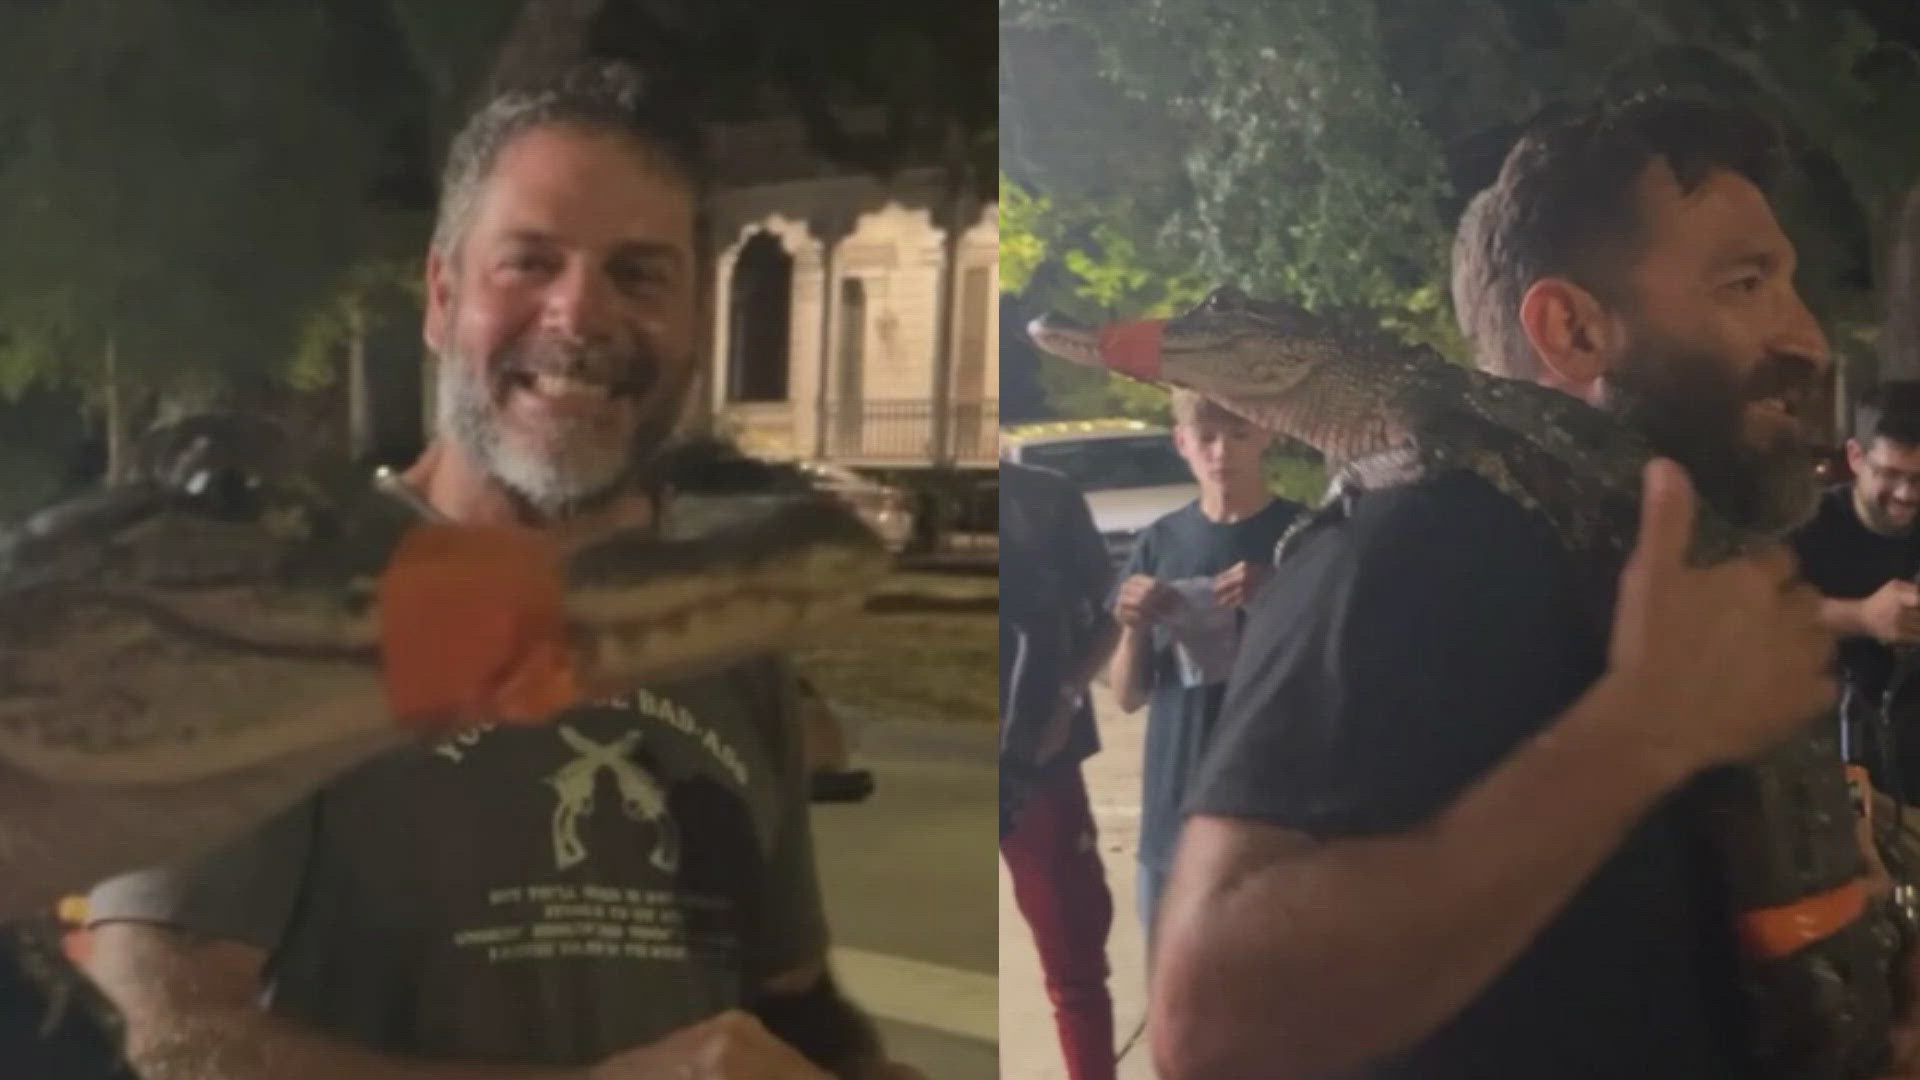 They told officials they found the gator in Lafitte and brought it with them to the city.